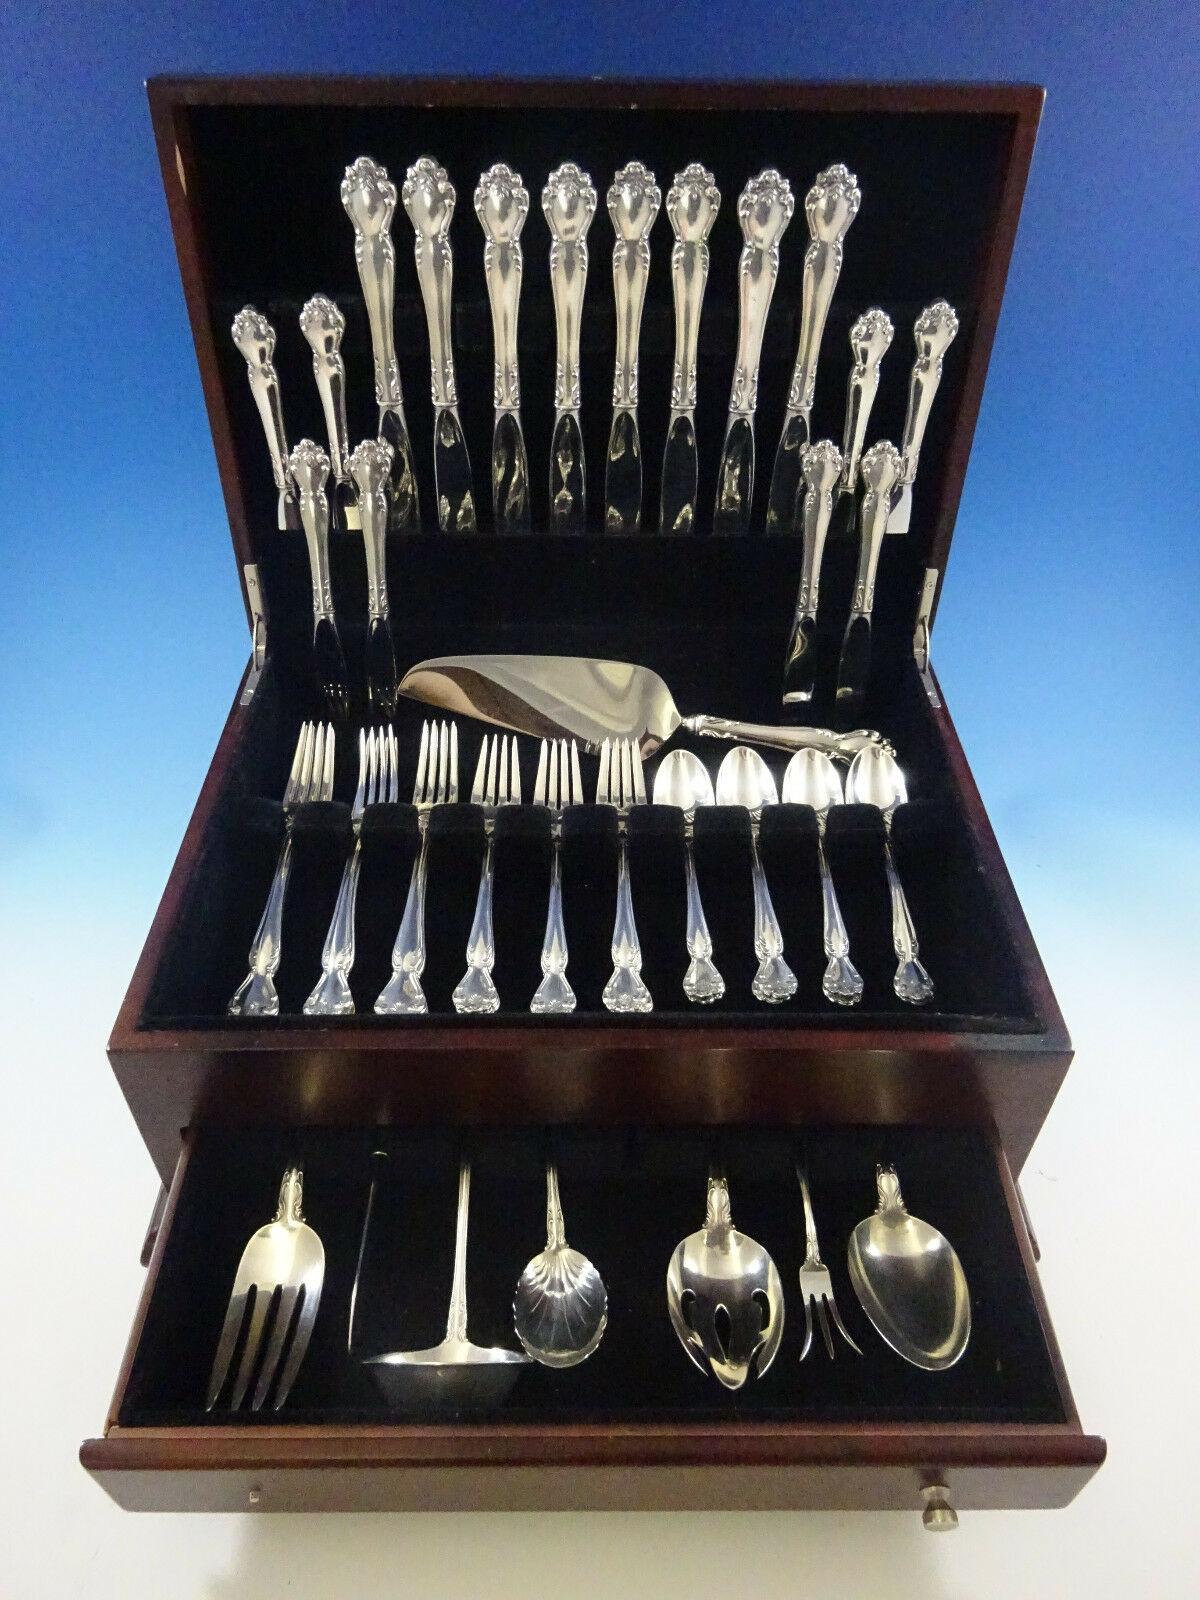 Beautiful Secret Garden by Gorham sterling silver flatware set - 48 pieces. This set includes:

8 knives, 9 1/4